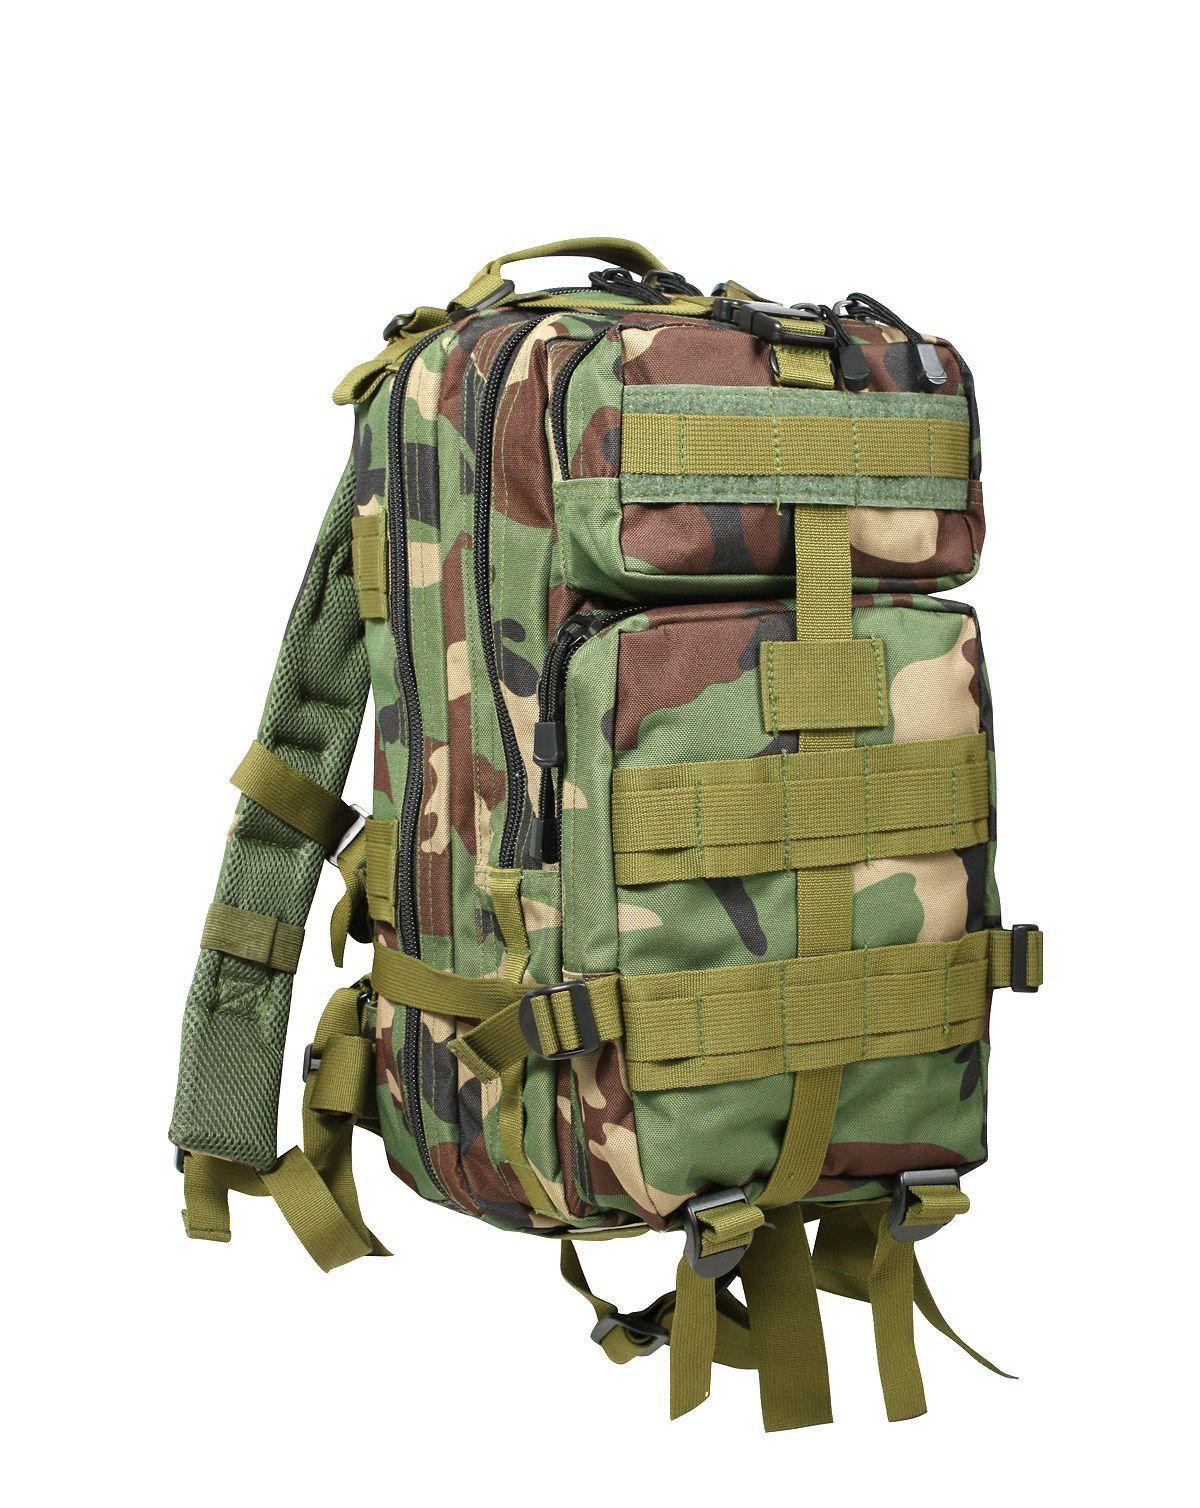 8: Rothco Transport Rygsæk m. MOLLE - 25 liter (Woodland, One Size)